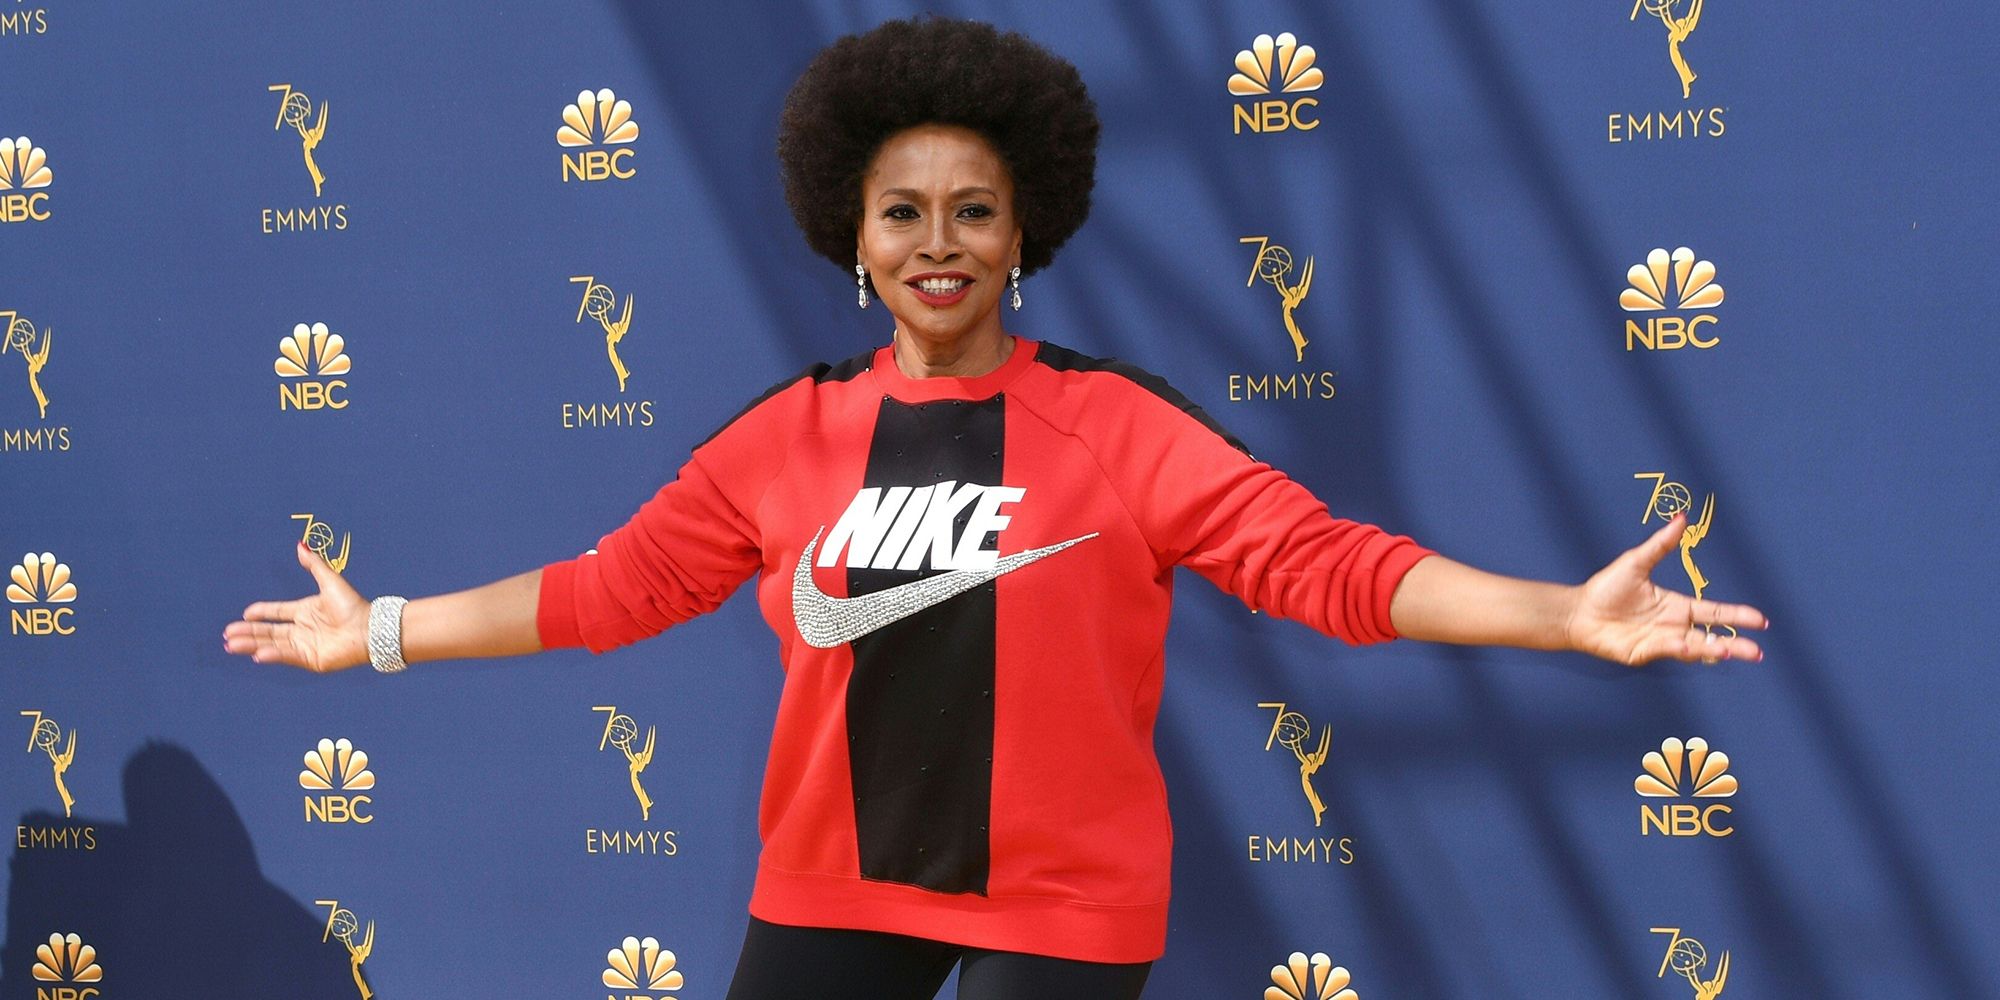 Actress Jenifer Lewis Wears Nike on the Red Carpet To Support Colin Kaepernick